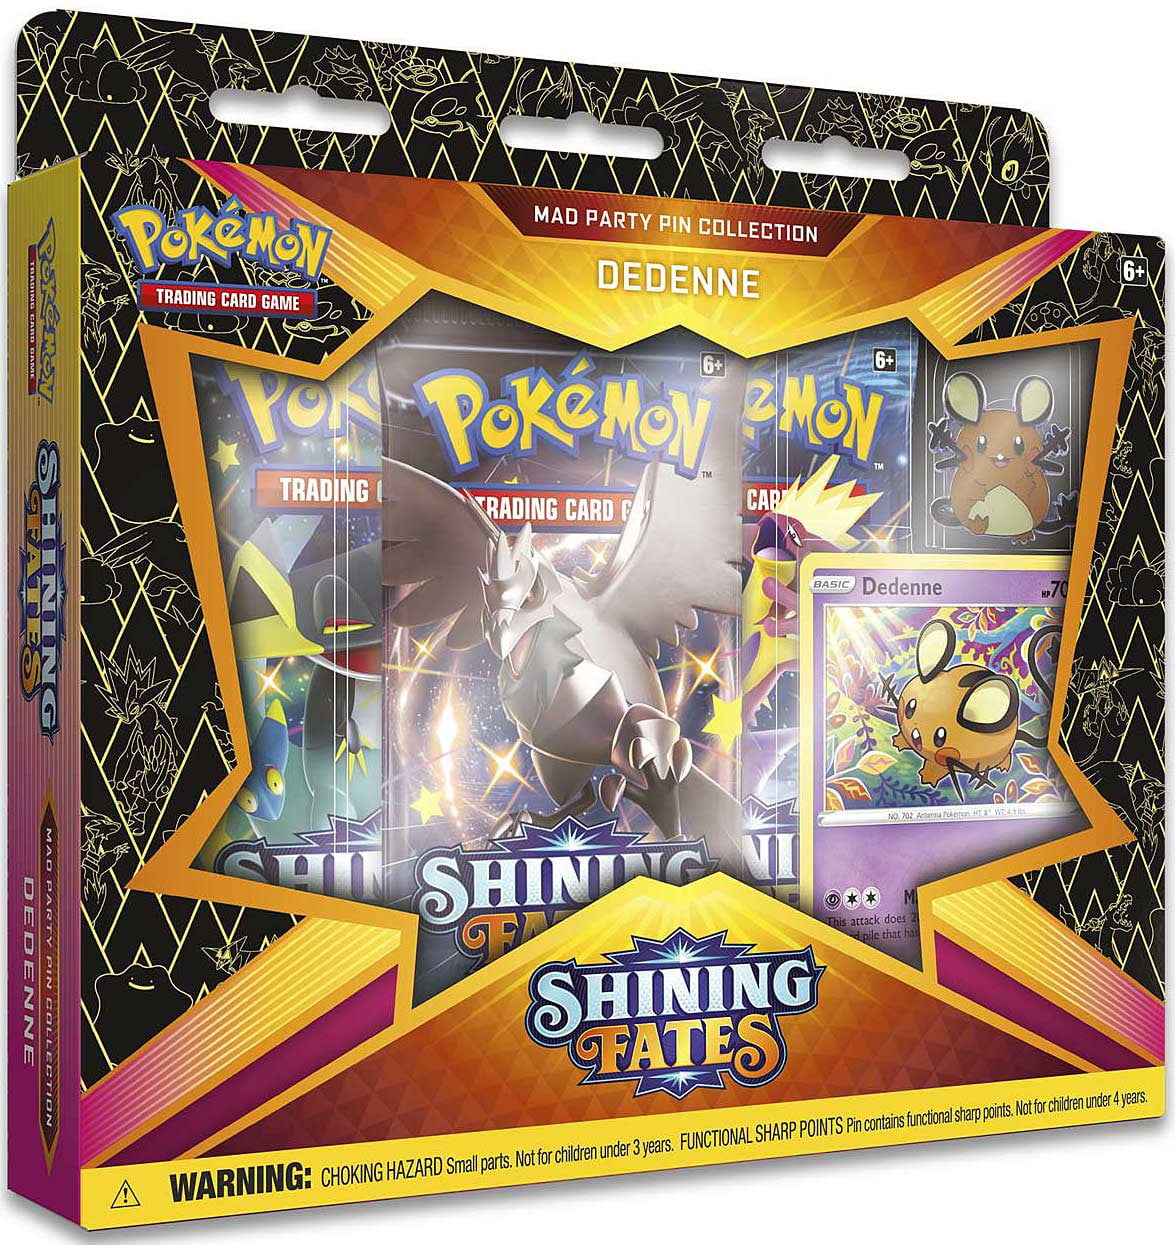 Shining Fates Mad Party Pin Collections Box for sale online Bunnelby Pokémon TCG 